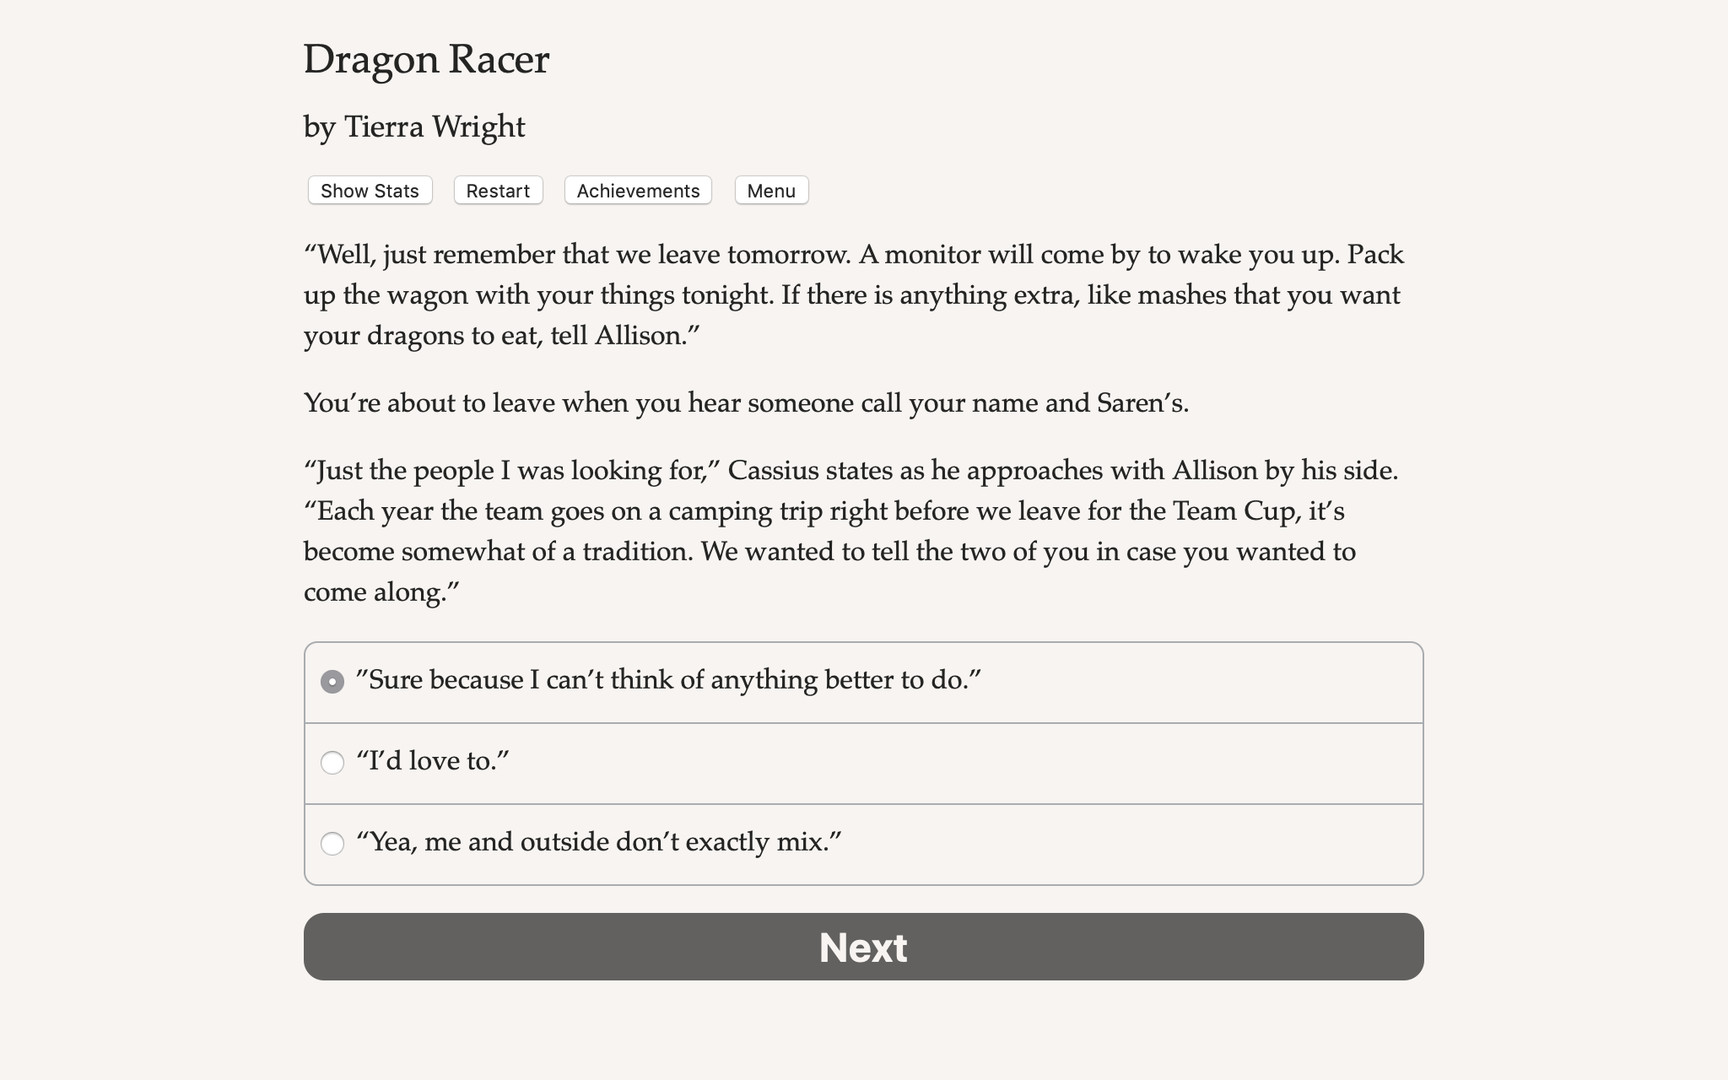 Dragon Racer (Hosted Games) 💬 Review